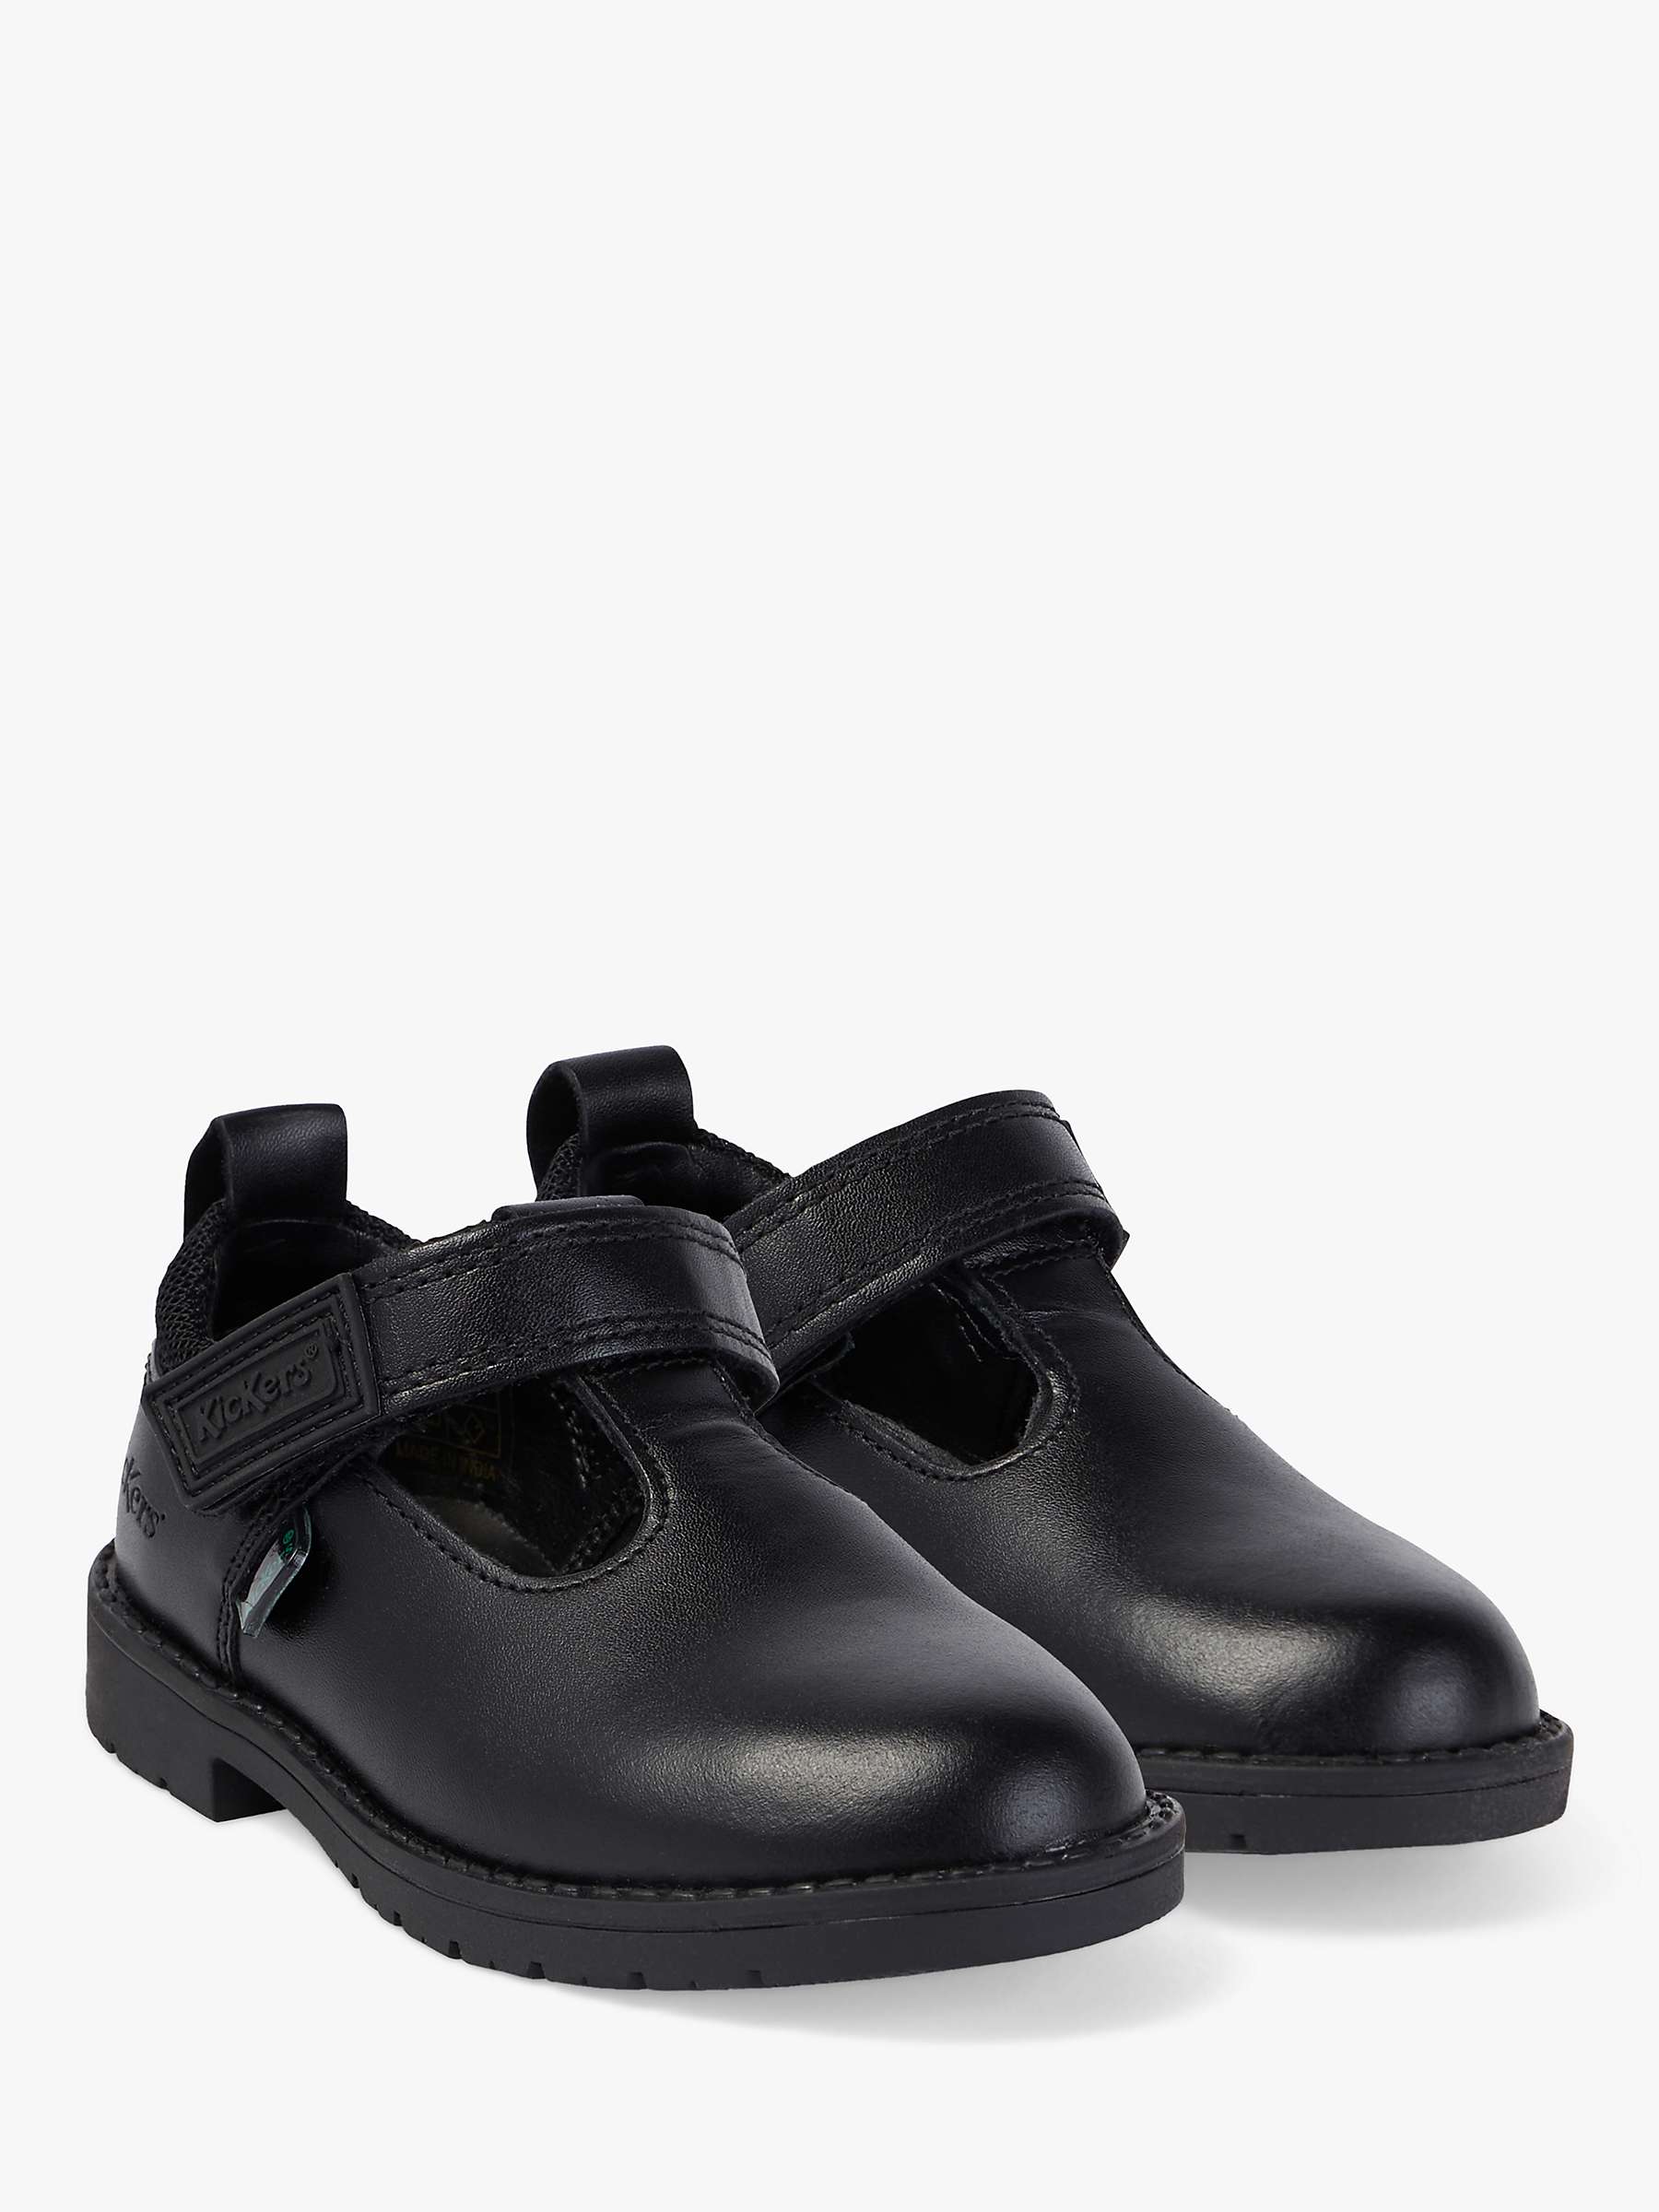 Buy Kickers Kids' Lachly T-Bar Mary Jane School Shoes Online at johnlewis.com